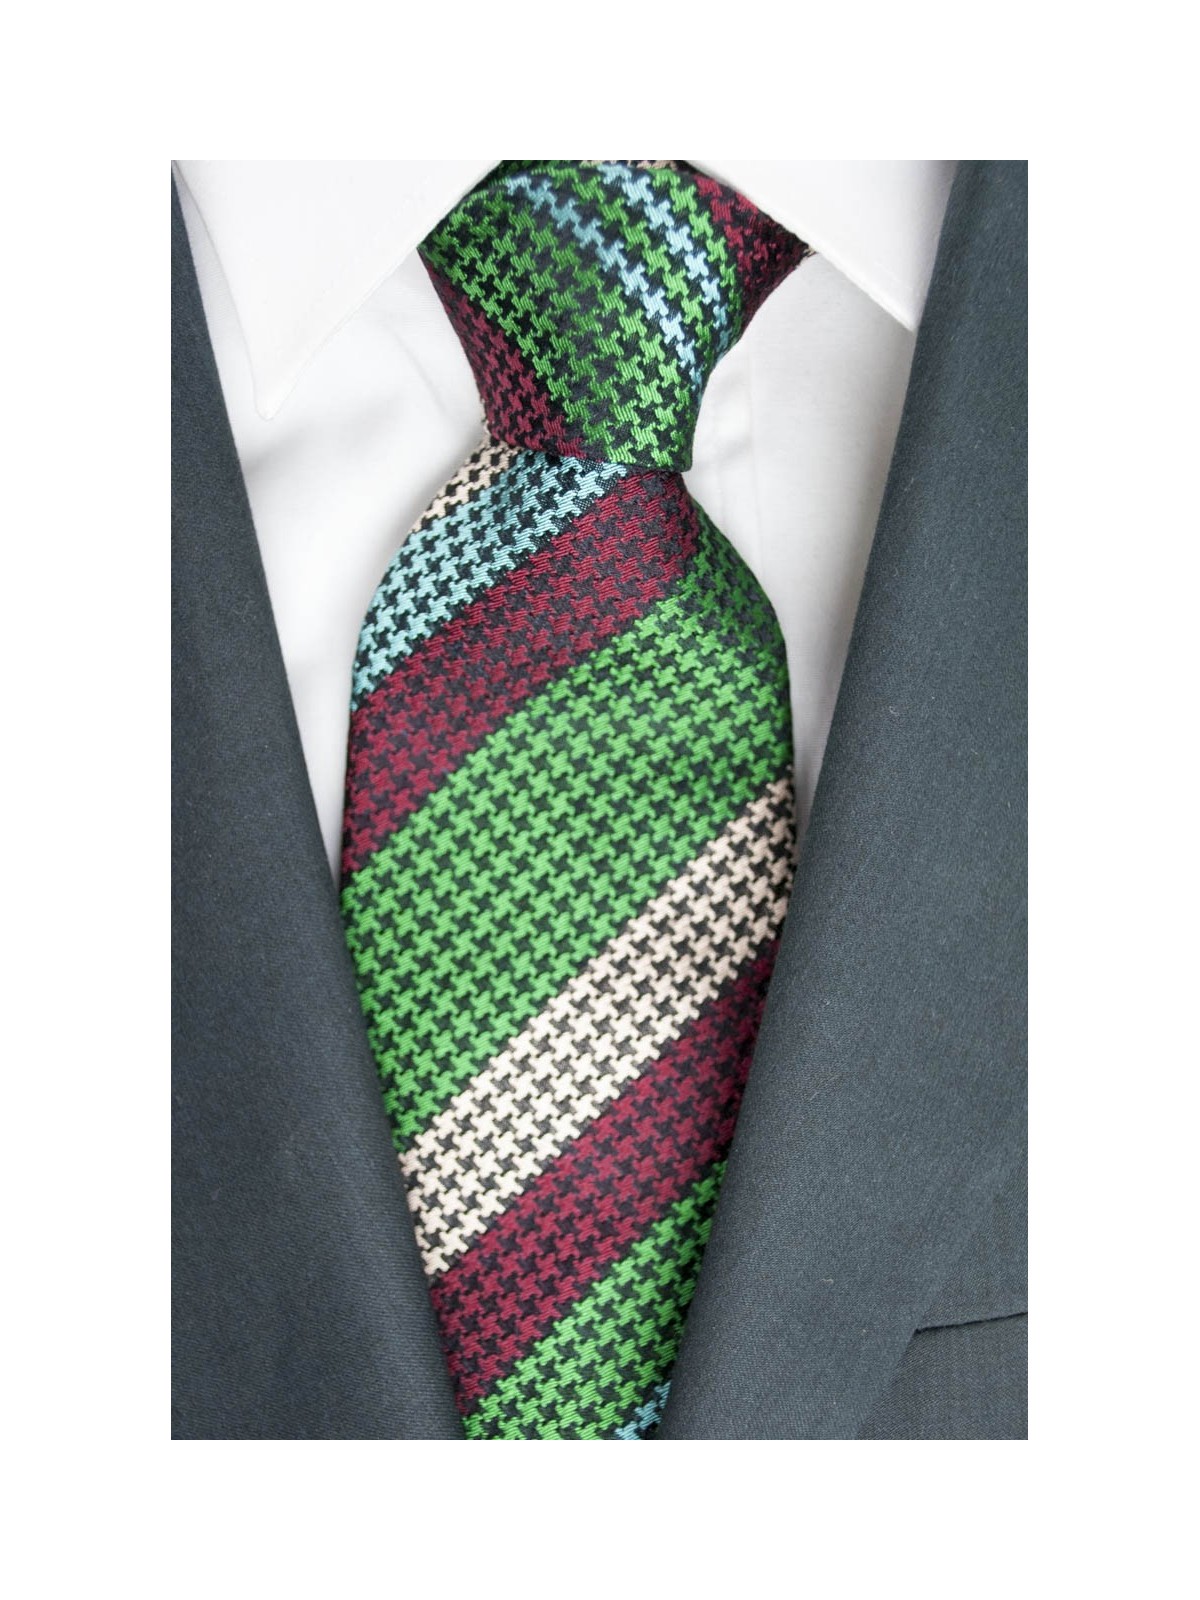 Regimental tie-Green and Burgundy houndstooth - 100% Pure Silk - Made in Italy